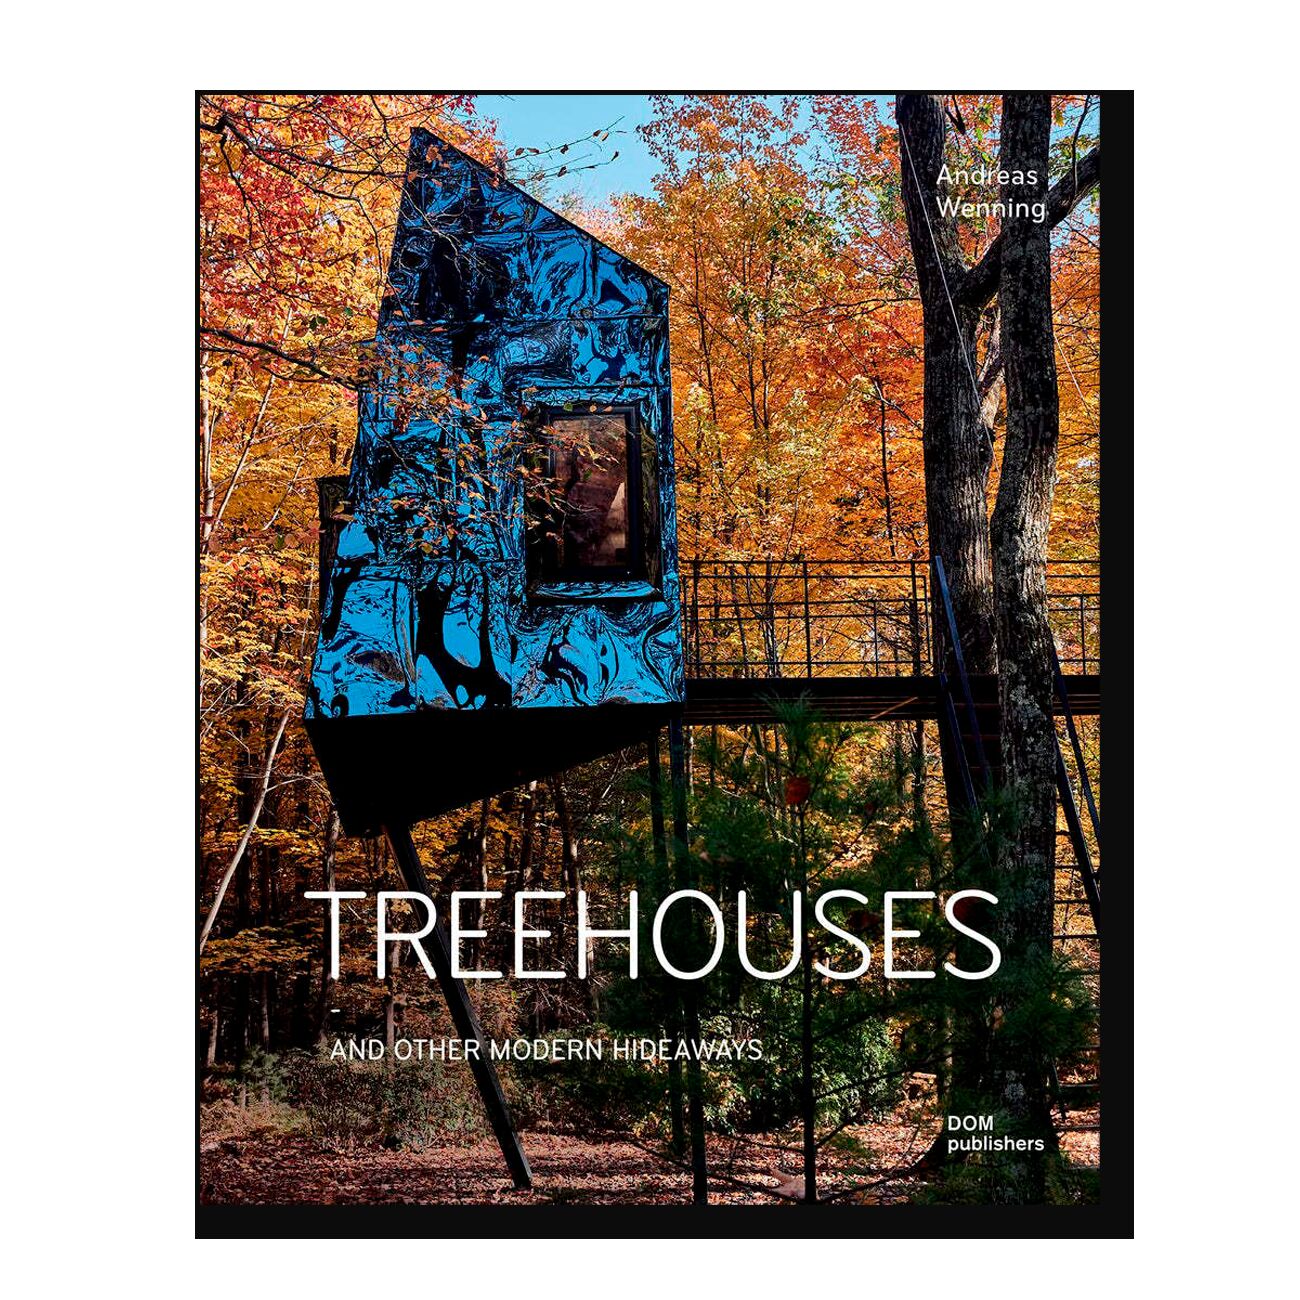 Treehouses: And Other Modern Hideaways